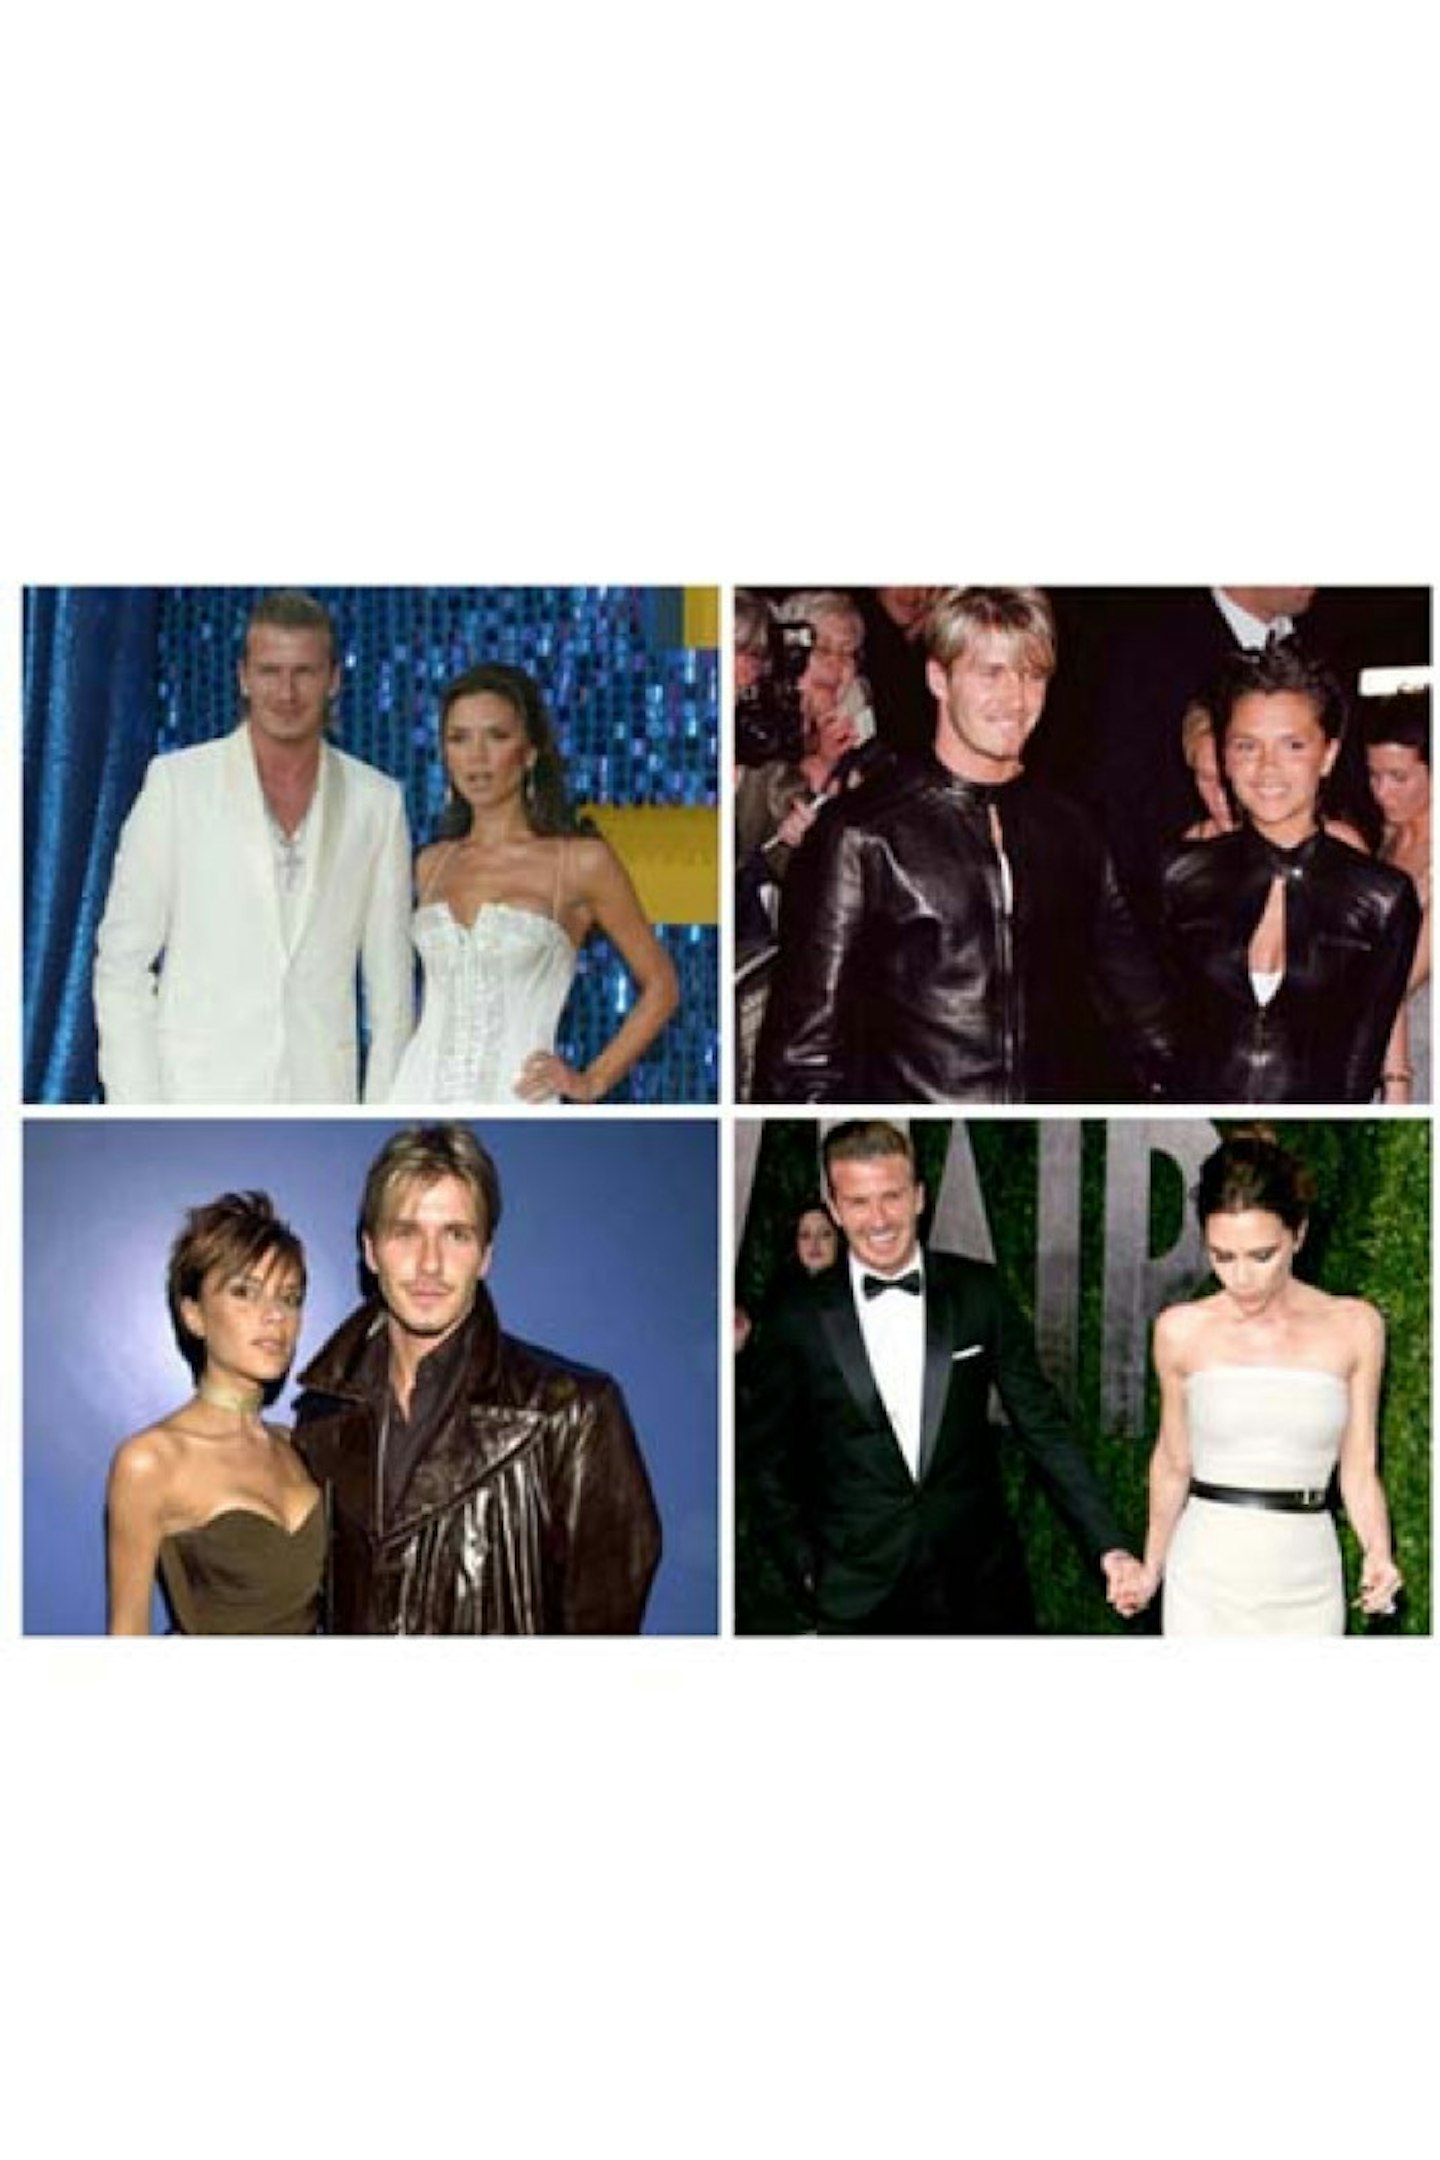 GALLERY>> VICTORIA AND DAVID BECKHAM'S MATCHY MATCHY MOMENTS